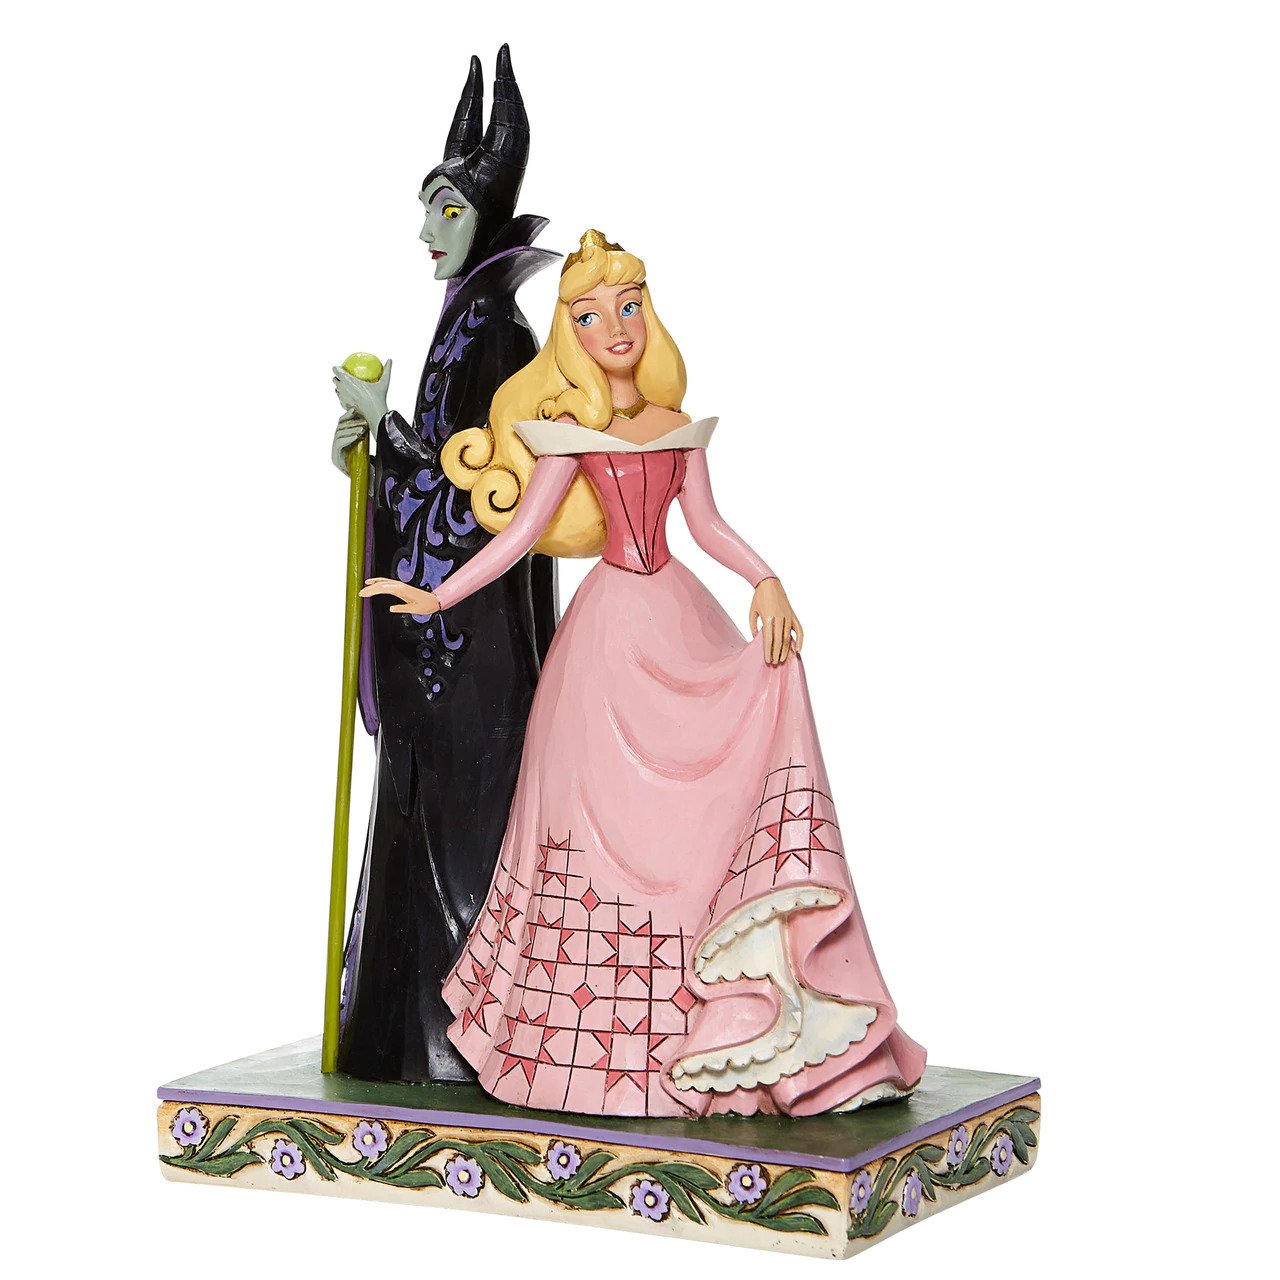 "Sorcery And Serenity" - Maleficent & Aurora Figurine By Jim Shore